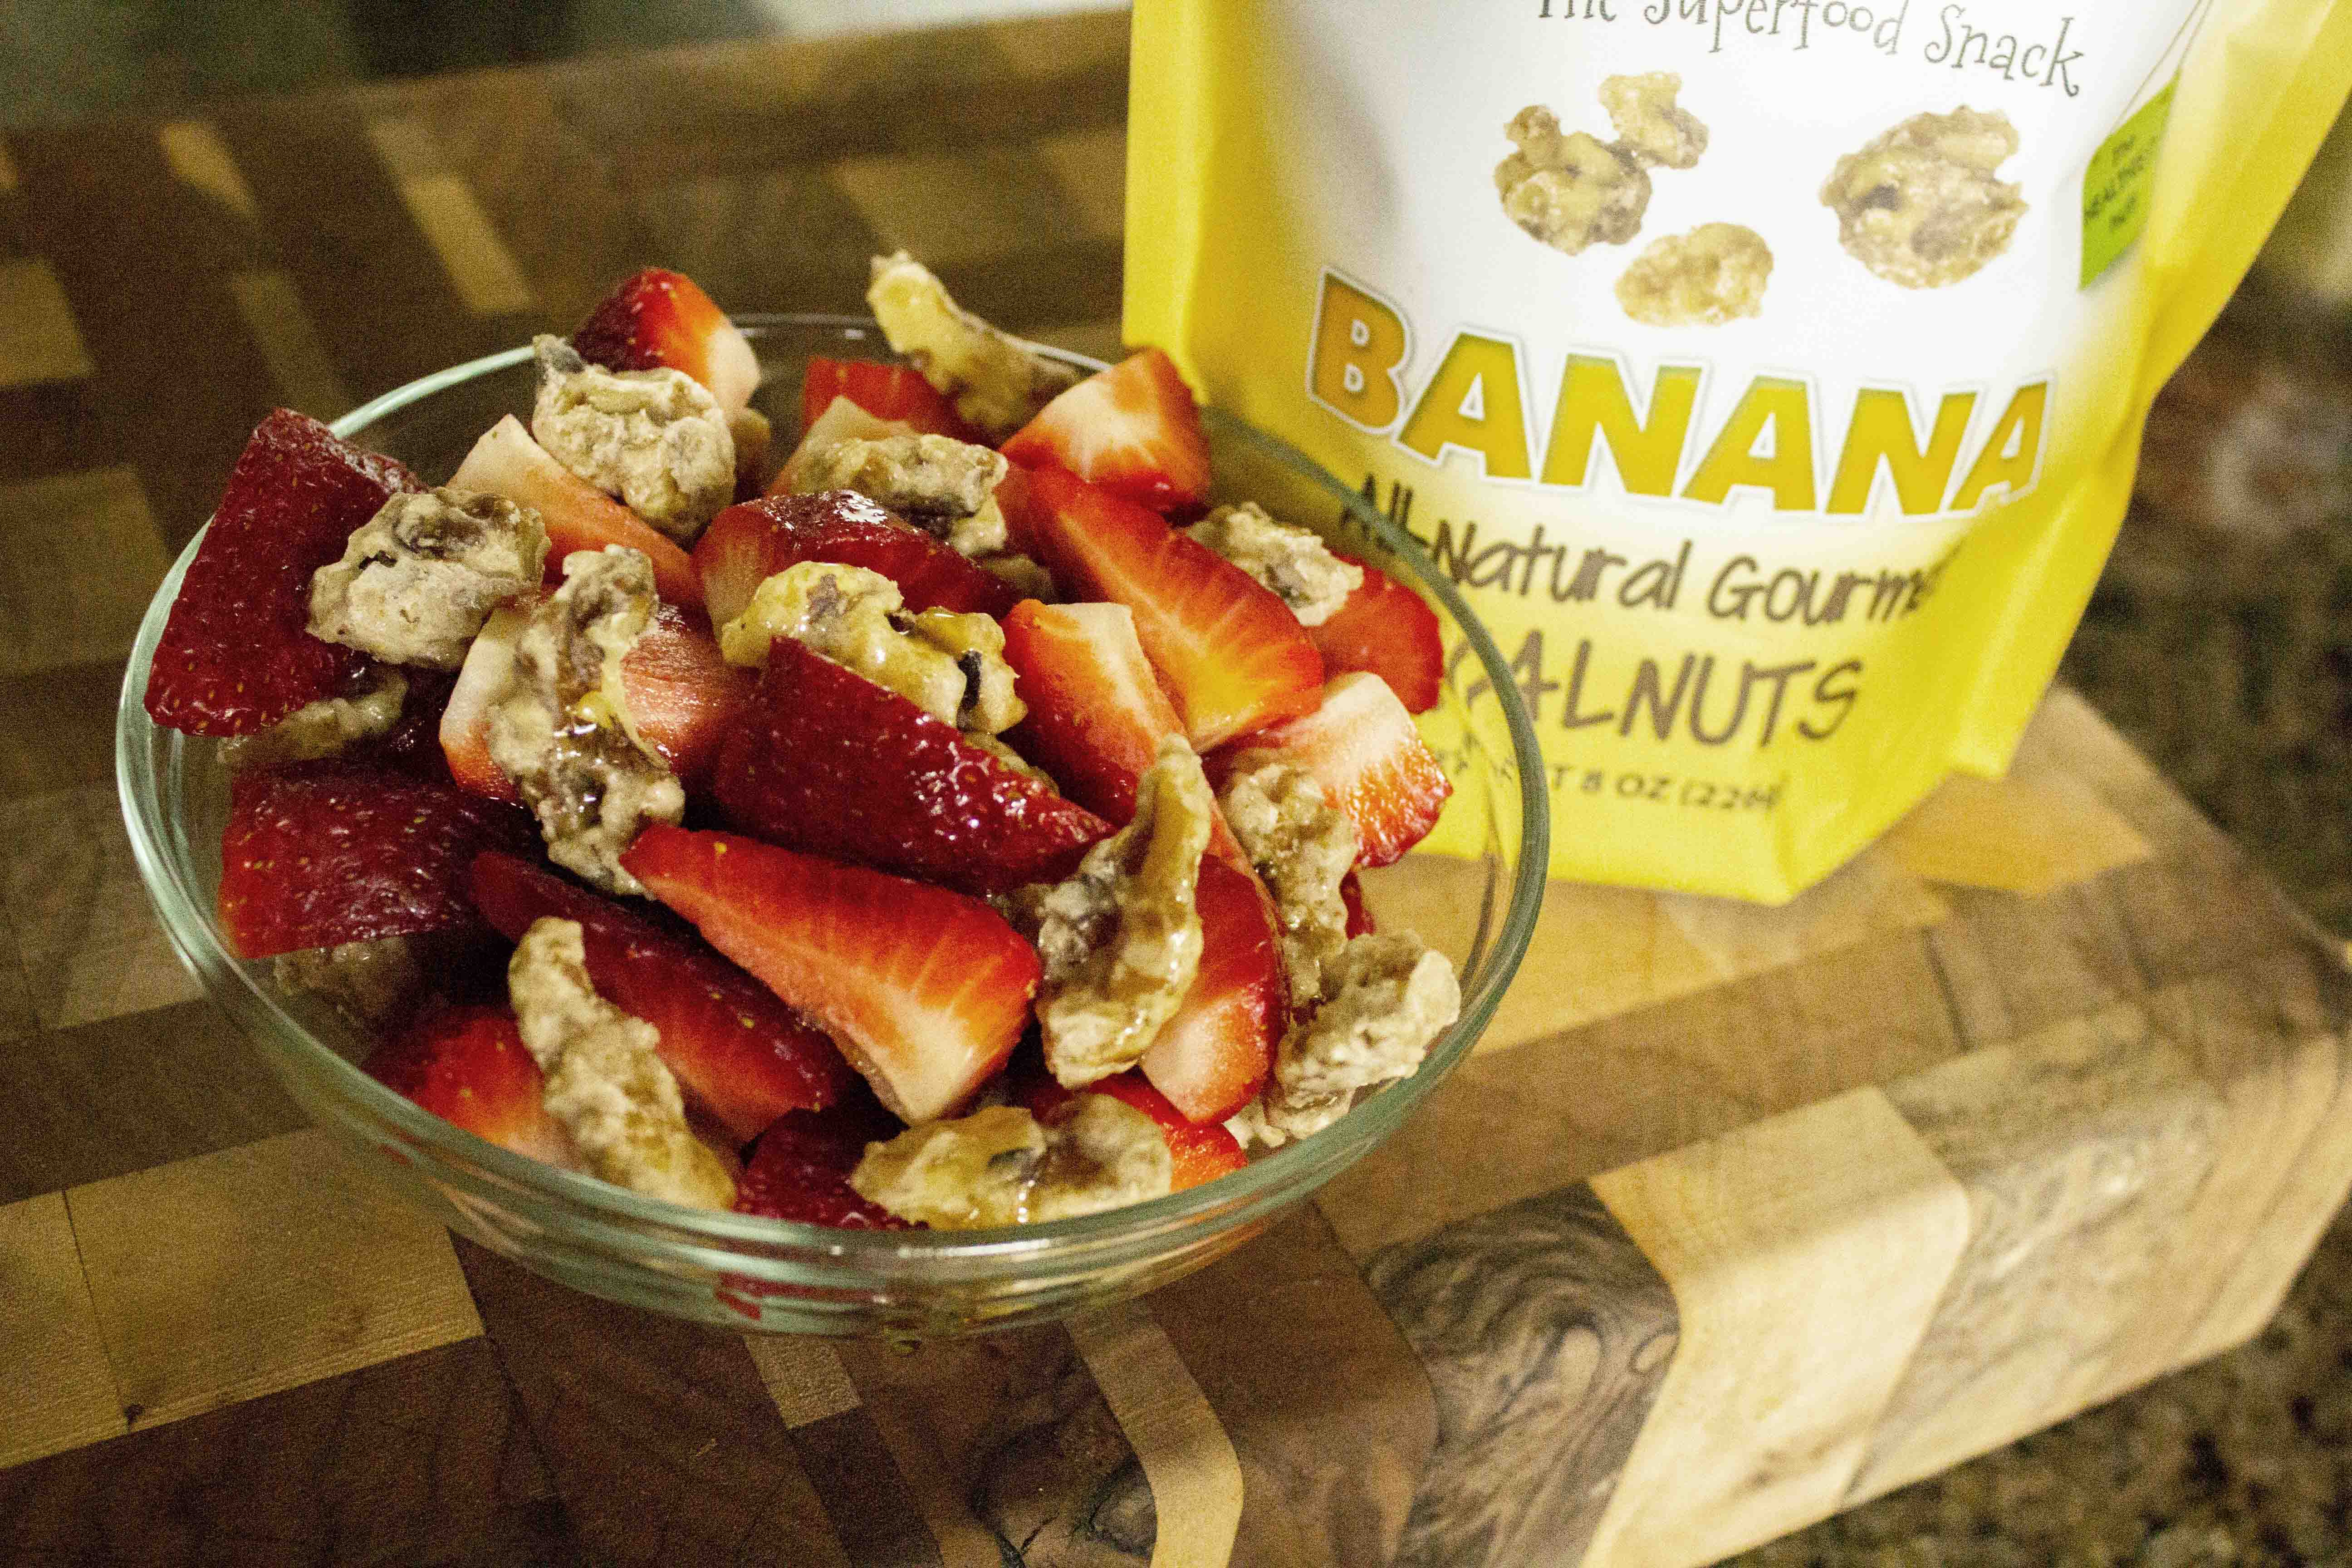 A bag of banana walnuts with a bowl of strawberries